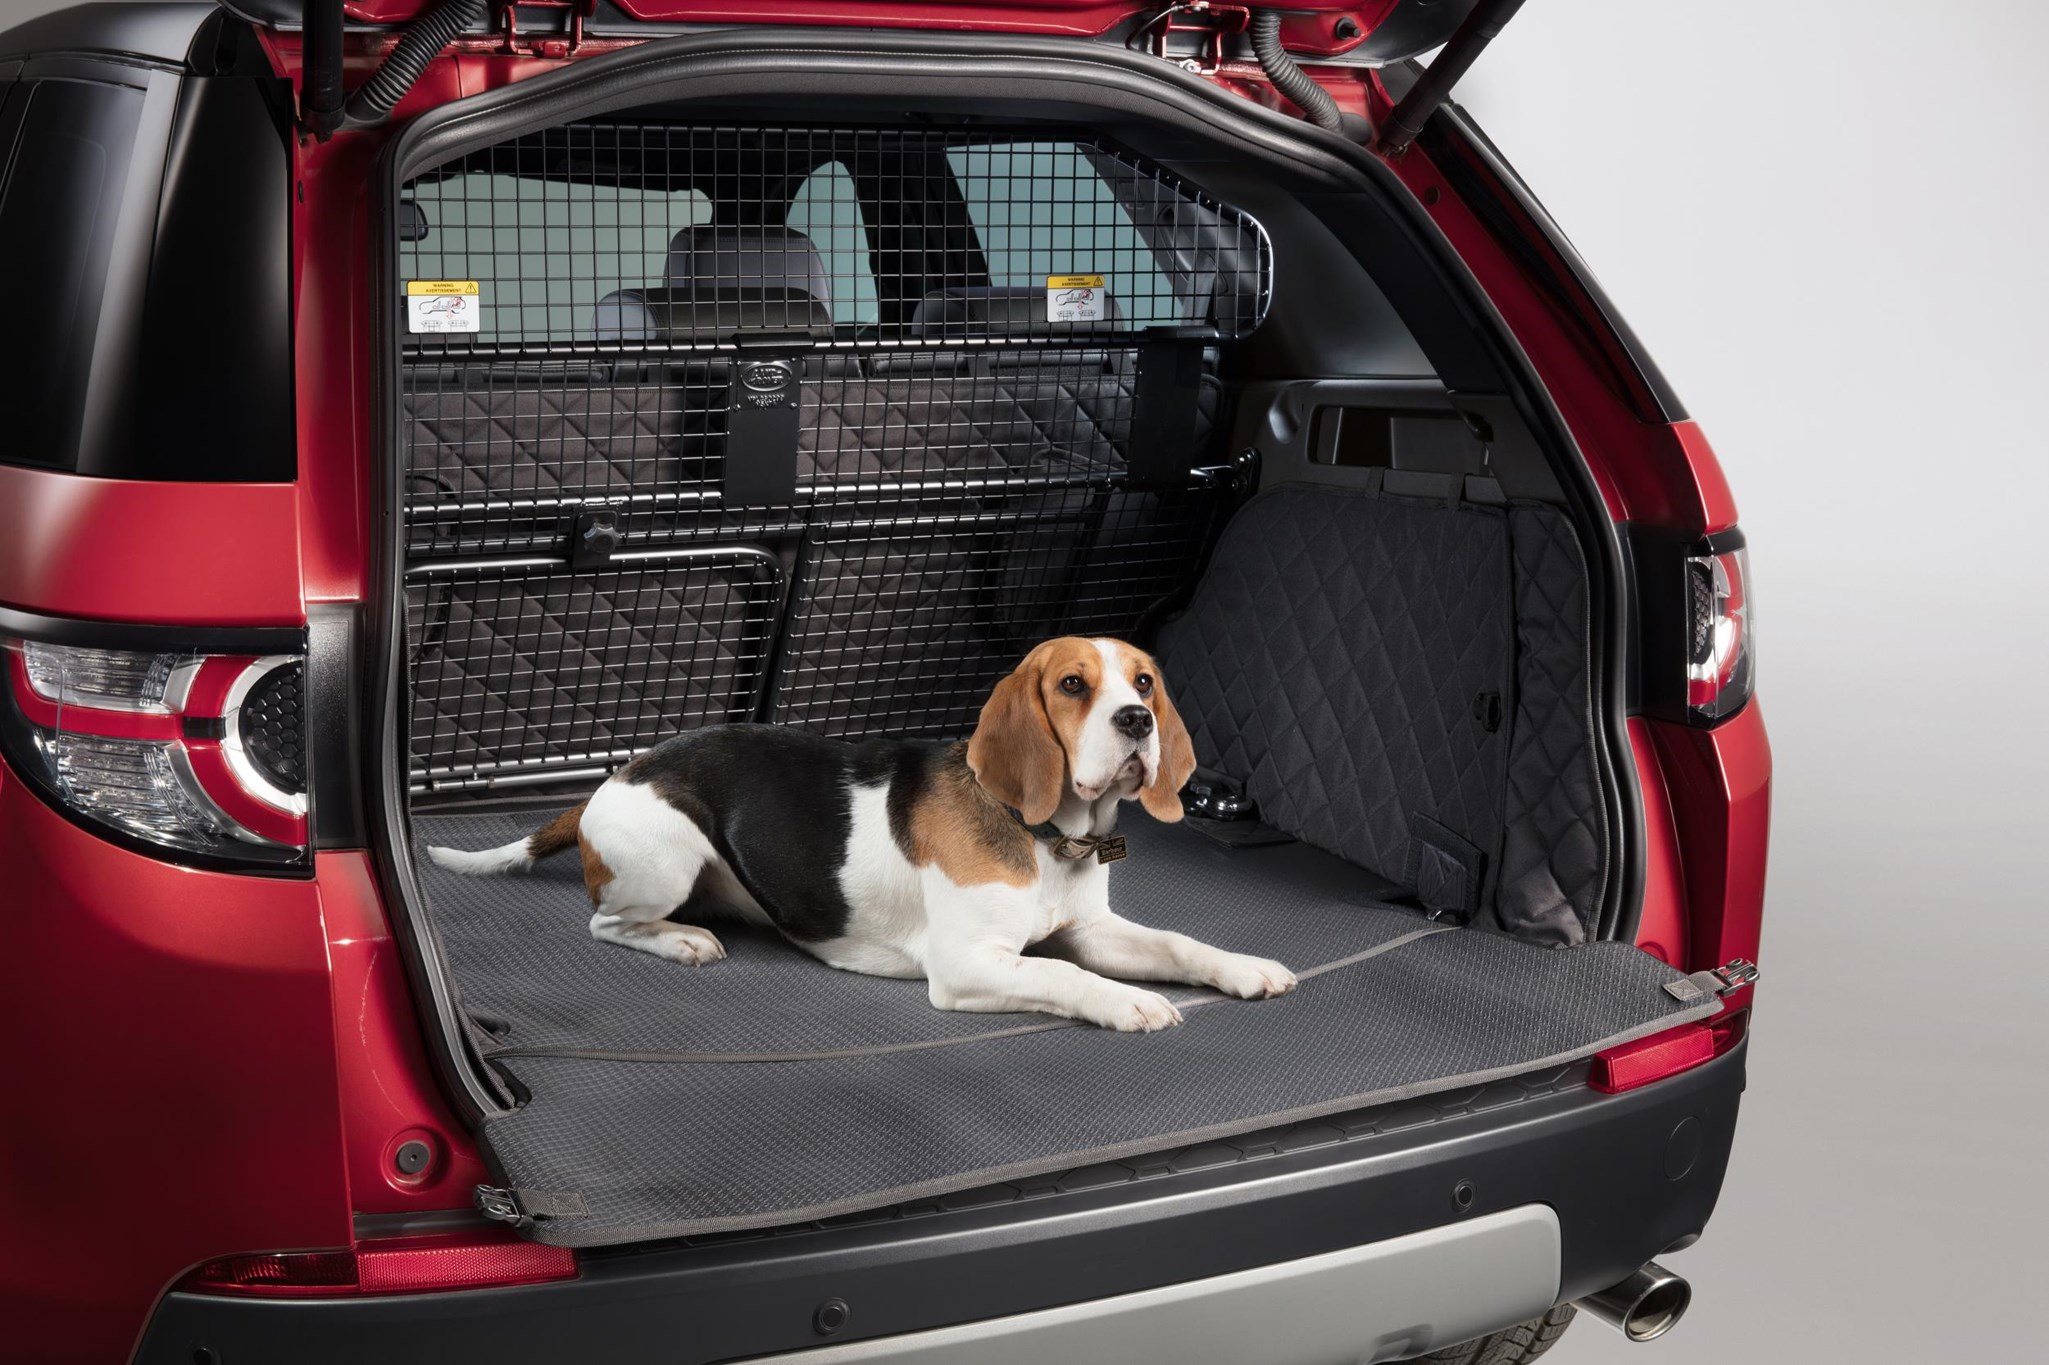 Best Cars For Dog Owners 2021 Uk Our, Best Dog Car Seats Uk 2020